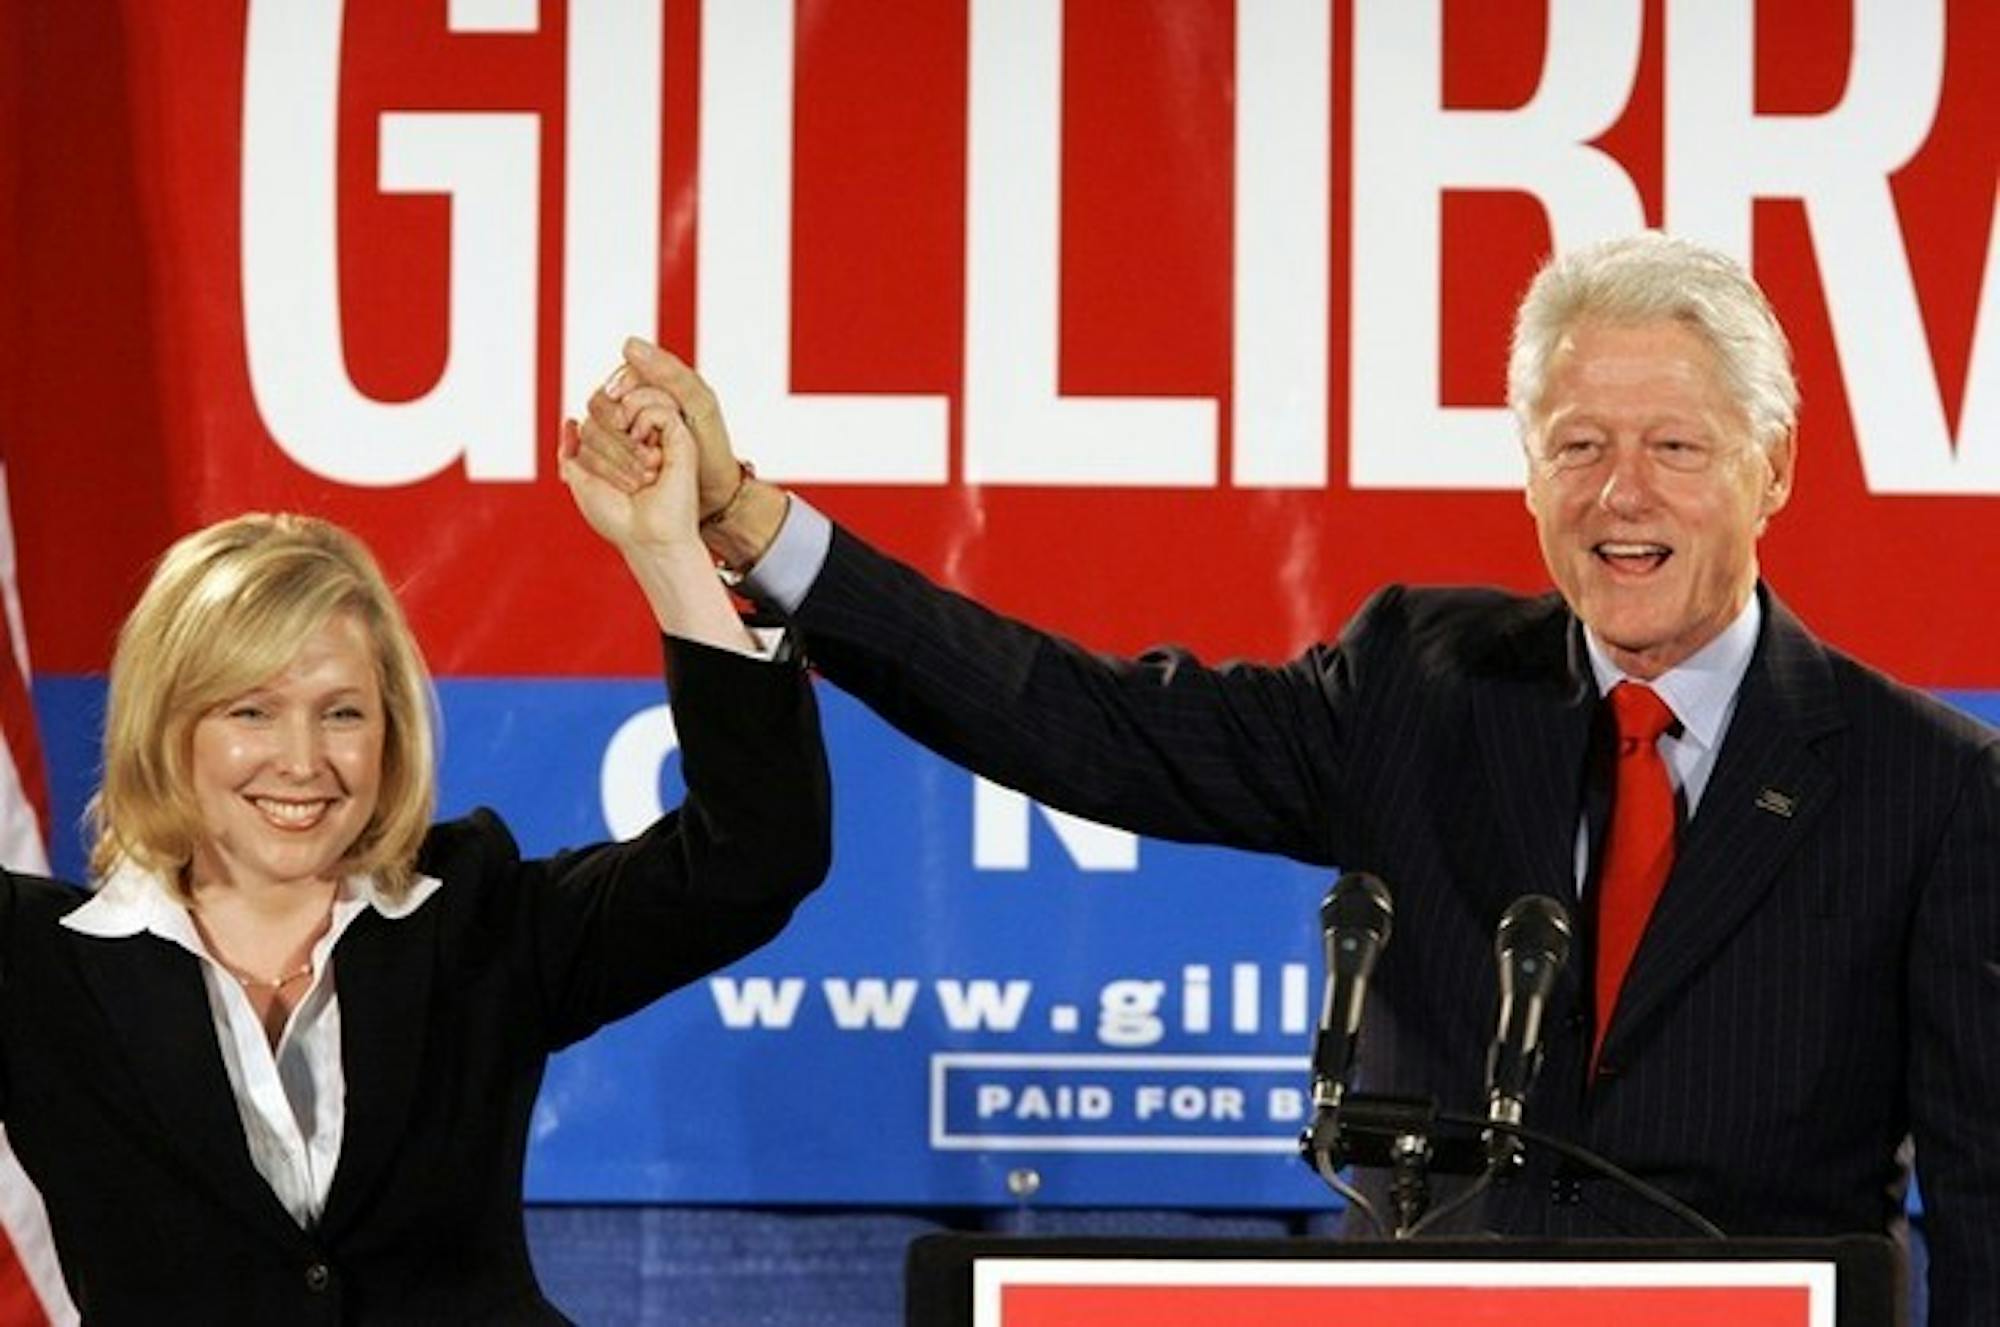 Former President Bill Clinton holds up the hand of Kirsten Gillibrand '88 at a rally on October 26th in Albany.